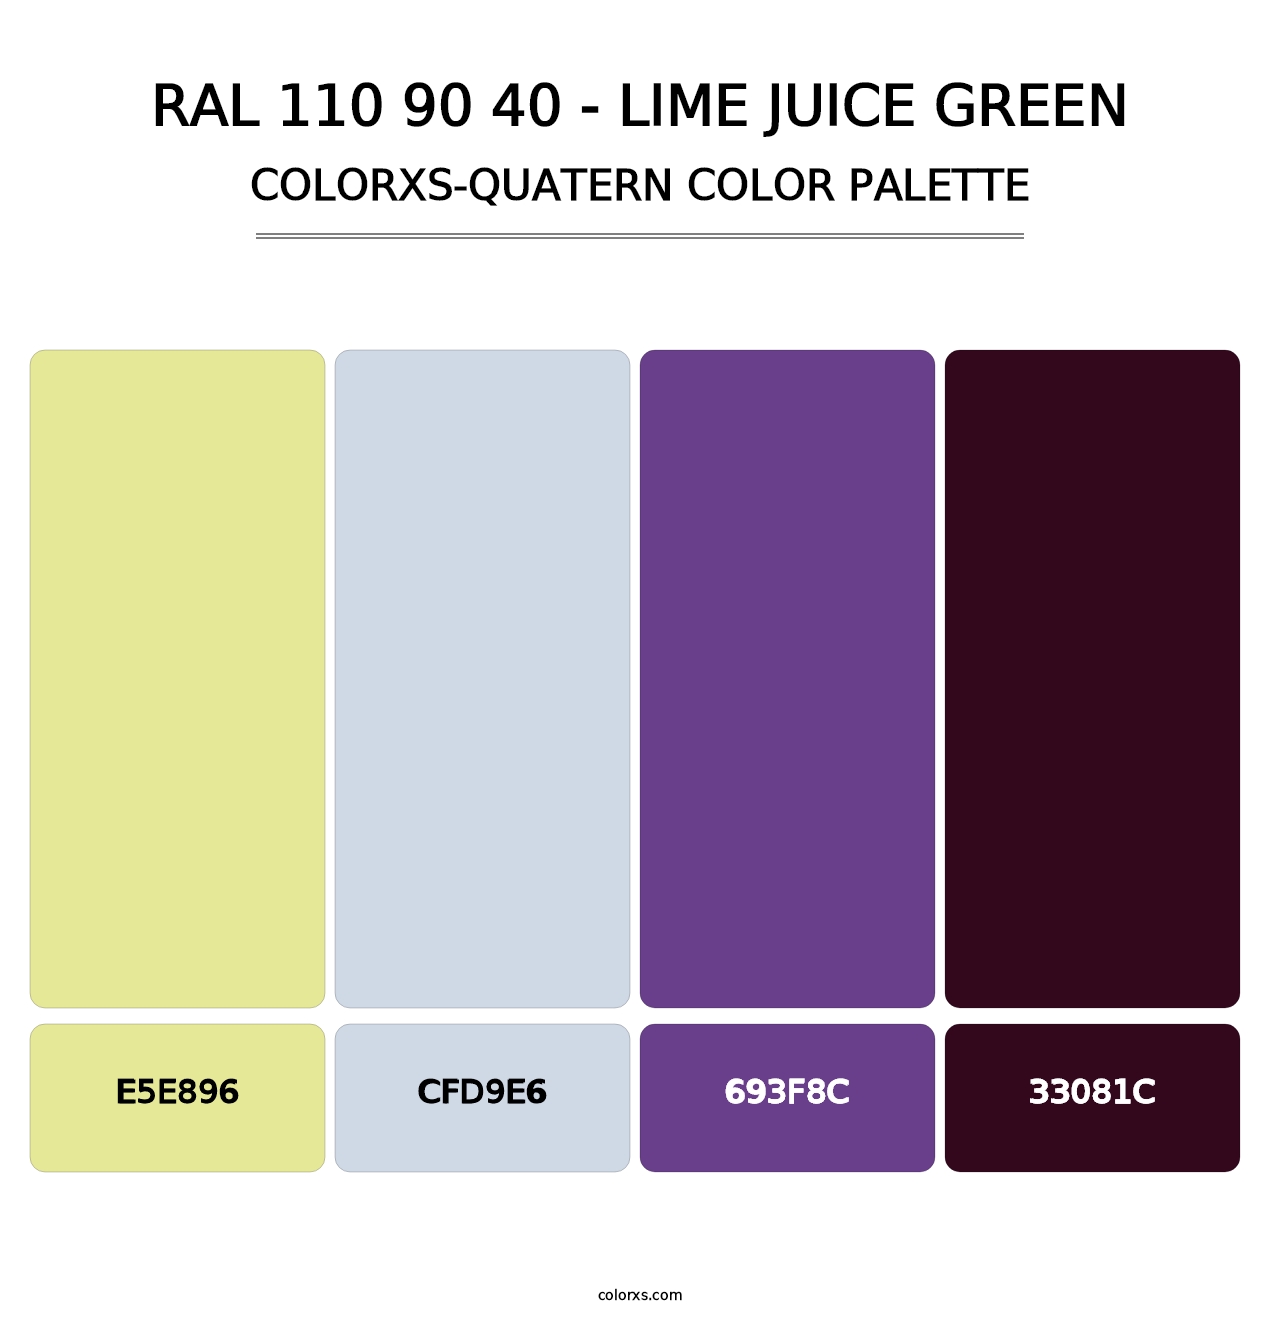 RAL 110 90 40 - Lime Juice Green - Colorxs Quatern Palette